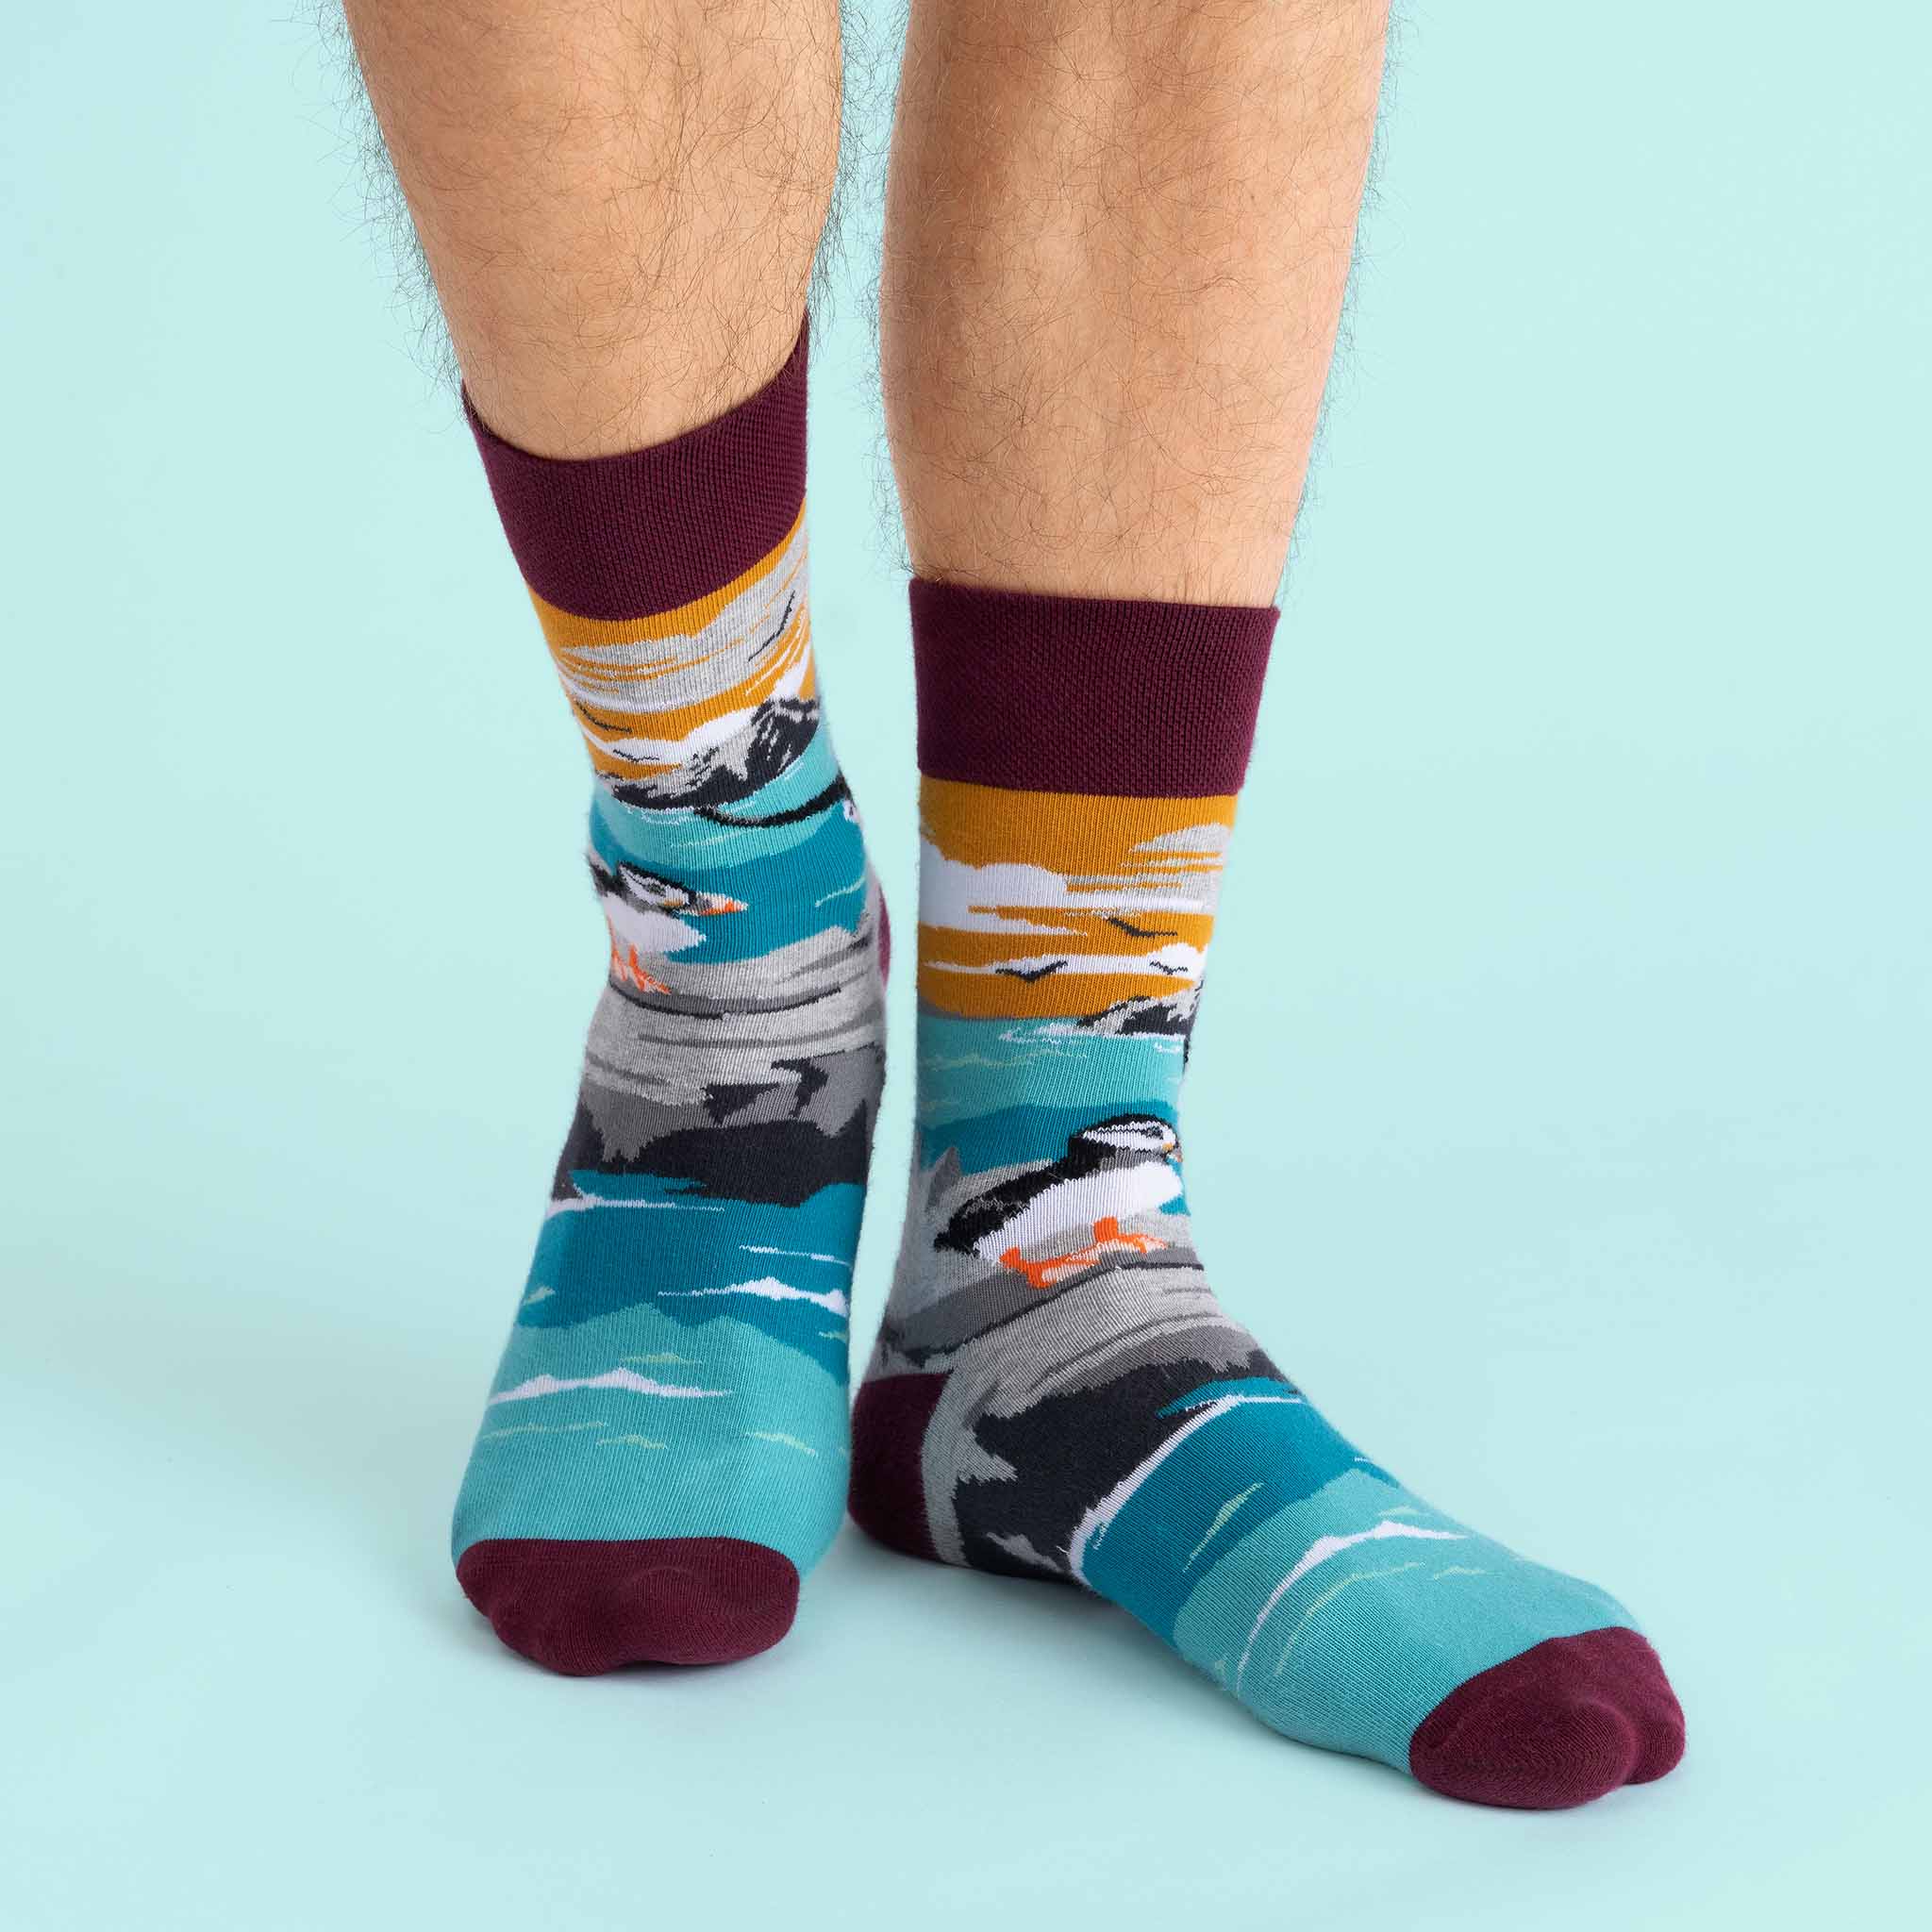 MULTICOLOURED IRISH SOCK OF SKELLIGS AND PUFFINS BY SOCK CO OP ON MAN